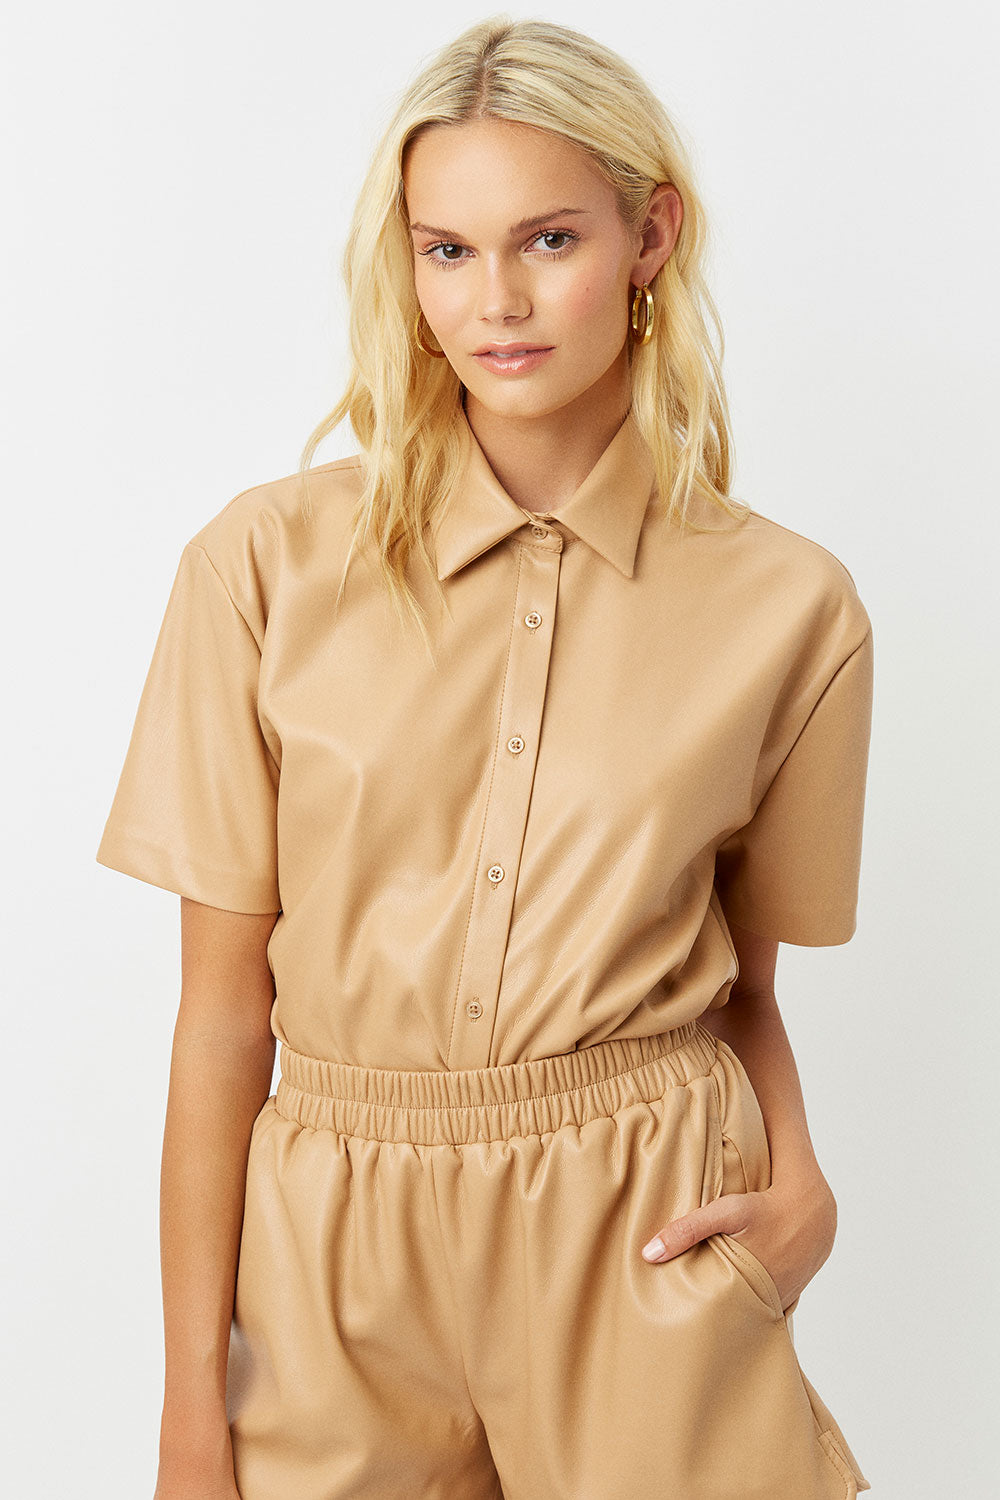 Rusty Vegan Leather Button Up Shirt - Earth